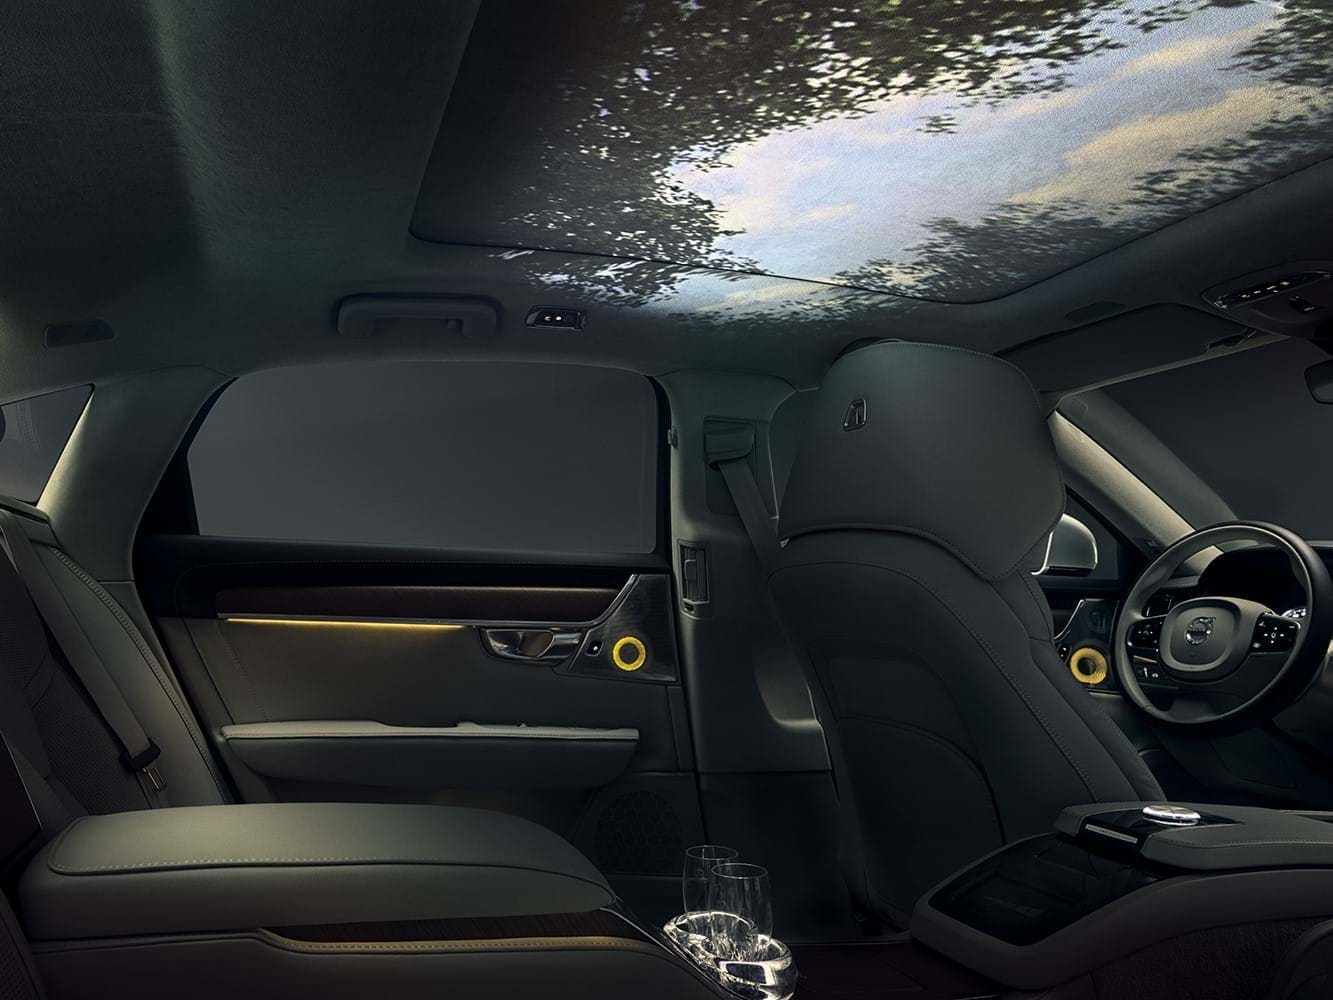 Interior of our concept for multi-sensory in-car experience with a panoramic forest sky view in the car ceiling